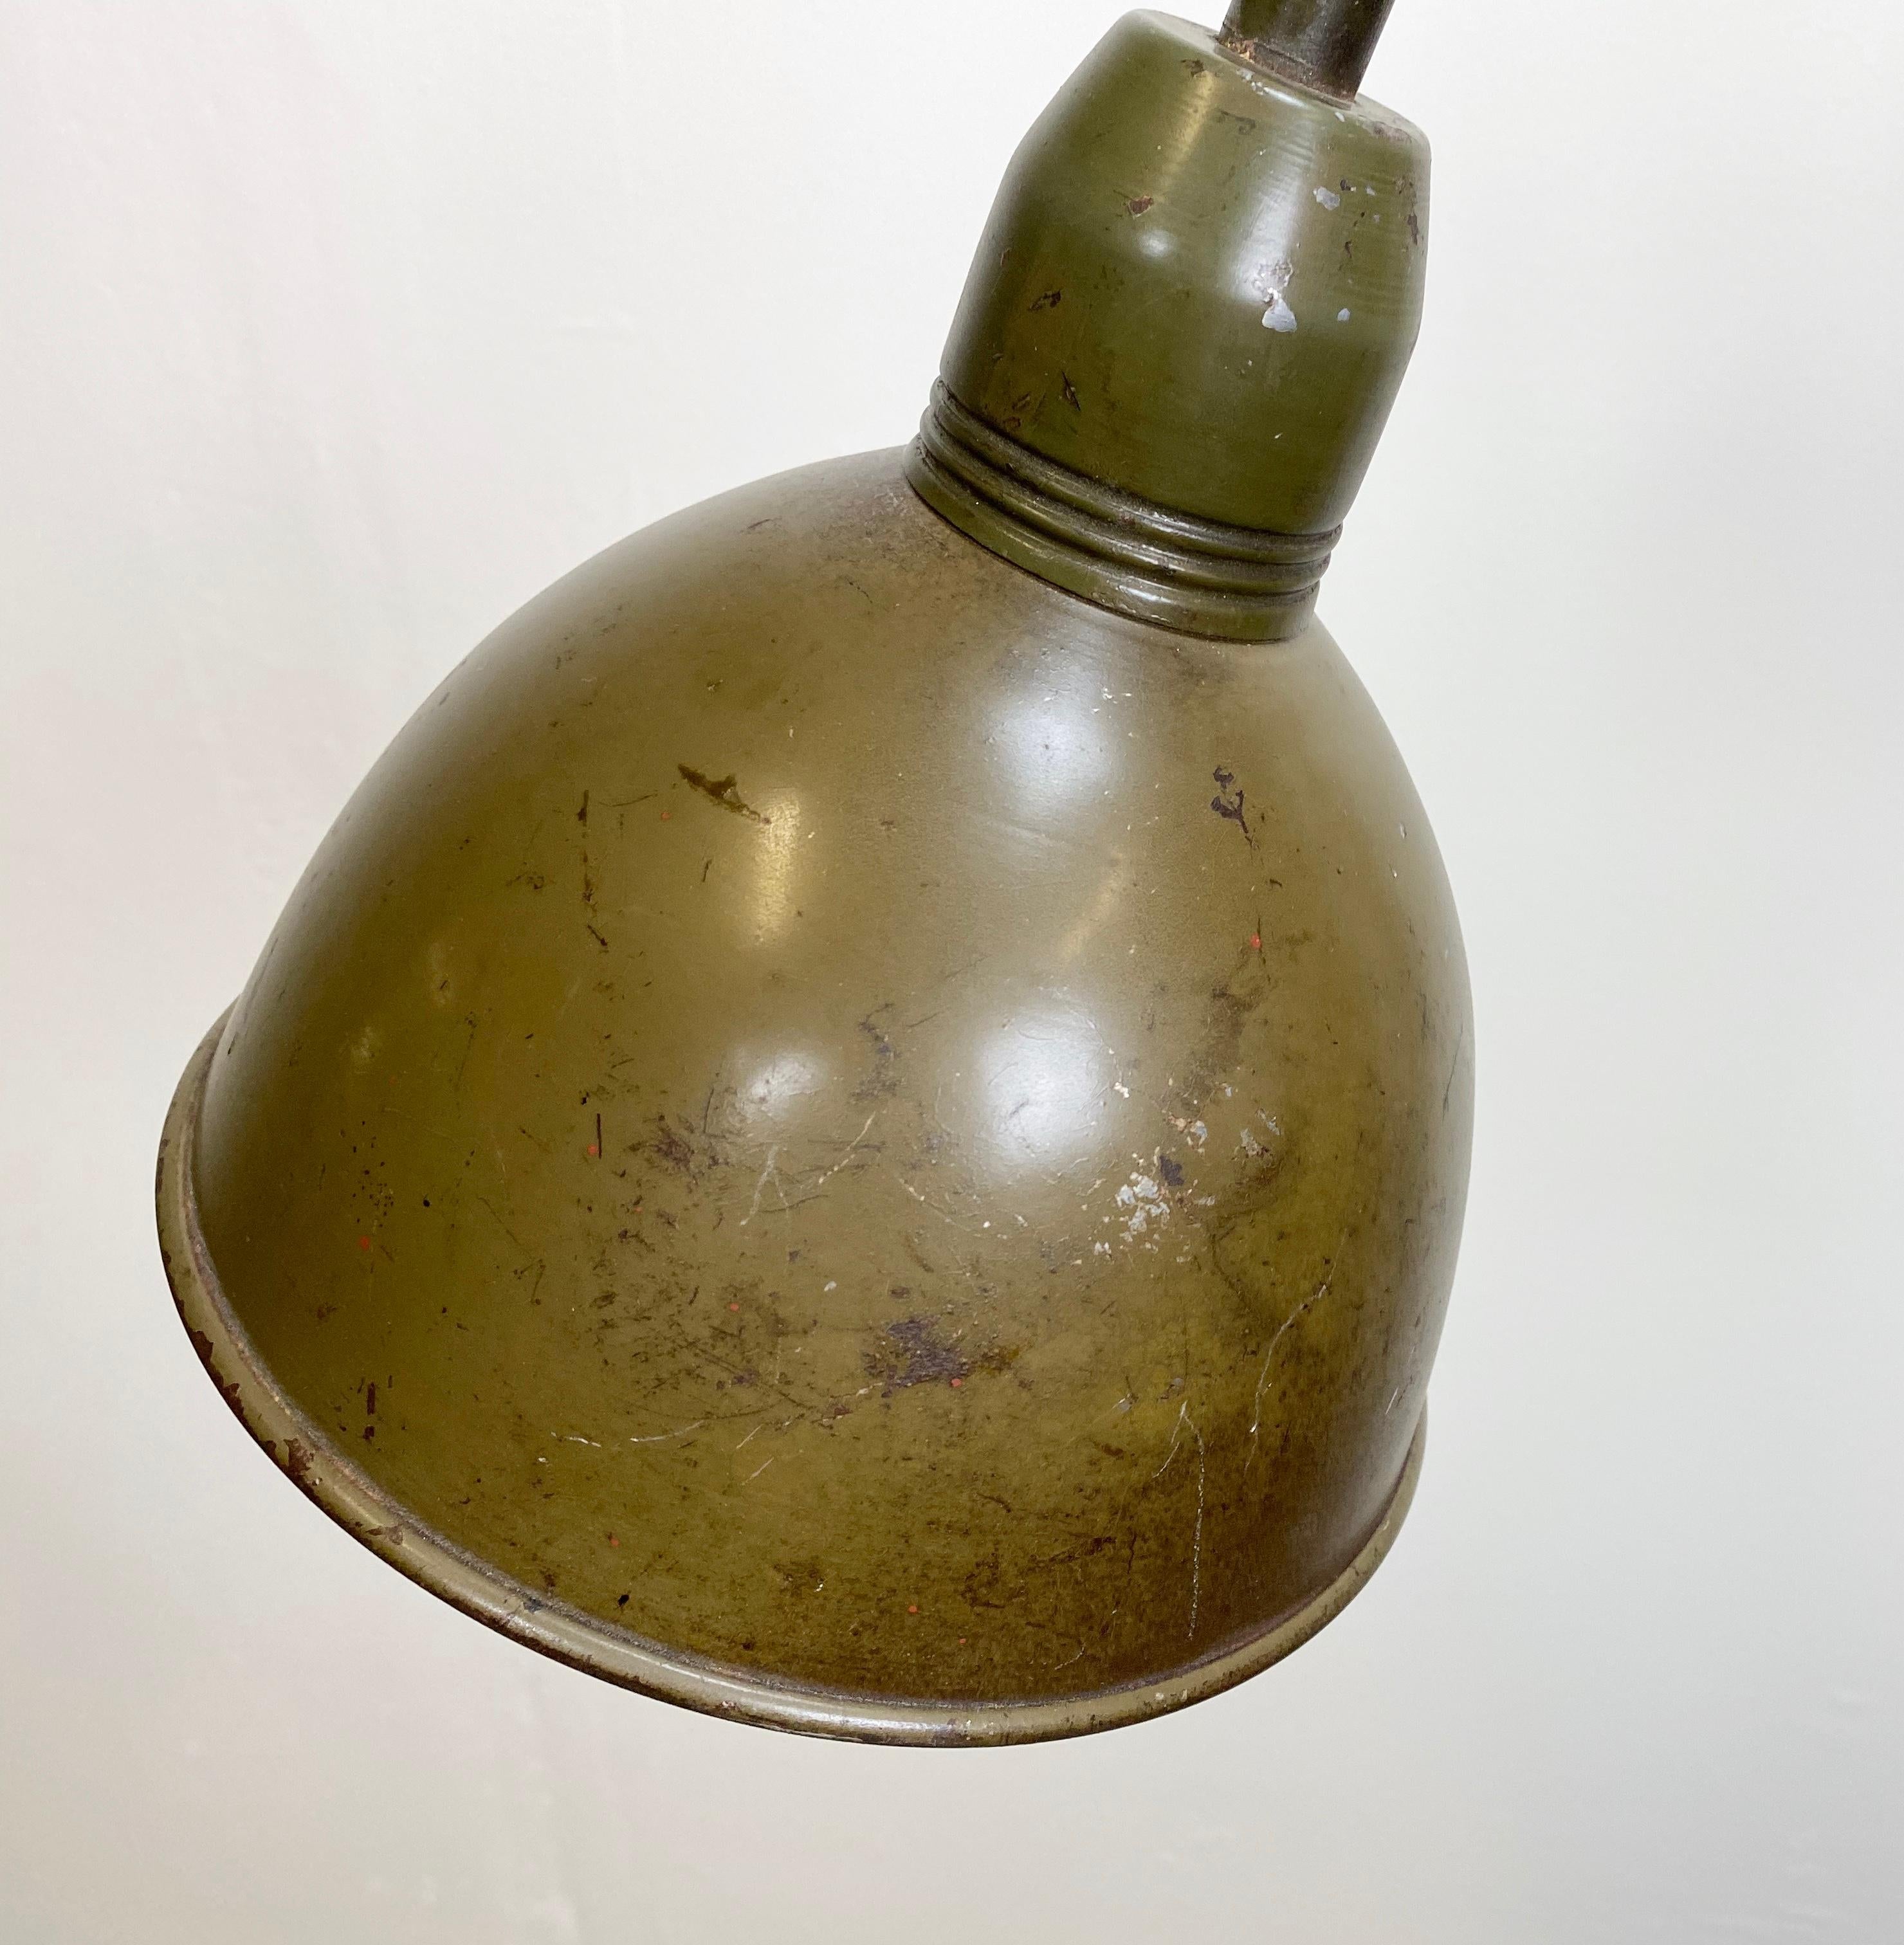 This vintage Industrial scissor lamp was produced by Elektroinstala in former Czechoslovakia during the 1960s. It has a green lampshade. The scissor arm is extendable and can be turned sideways. The lamp has new porcelain socket for E 27 lightbulbs